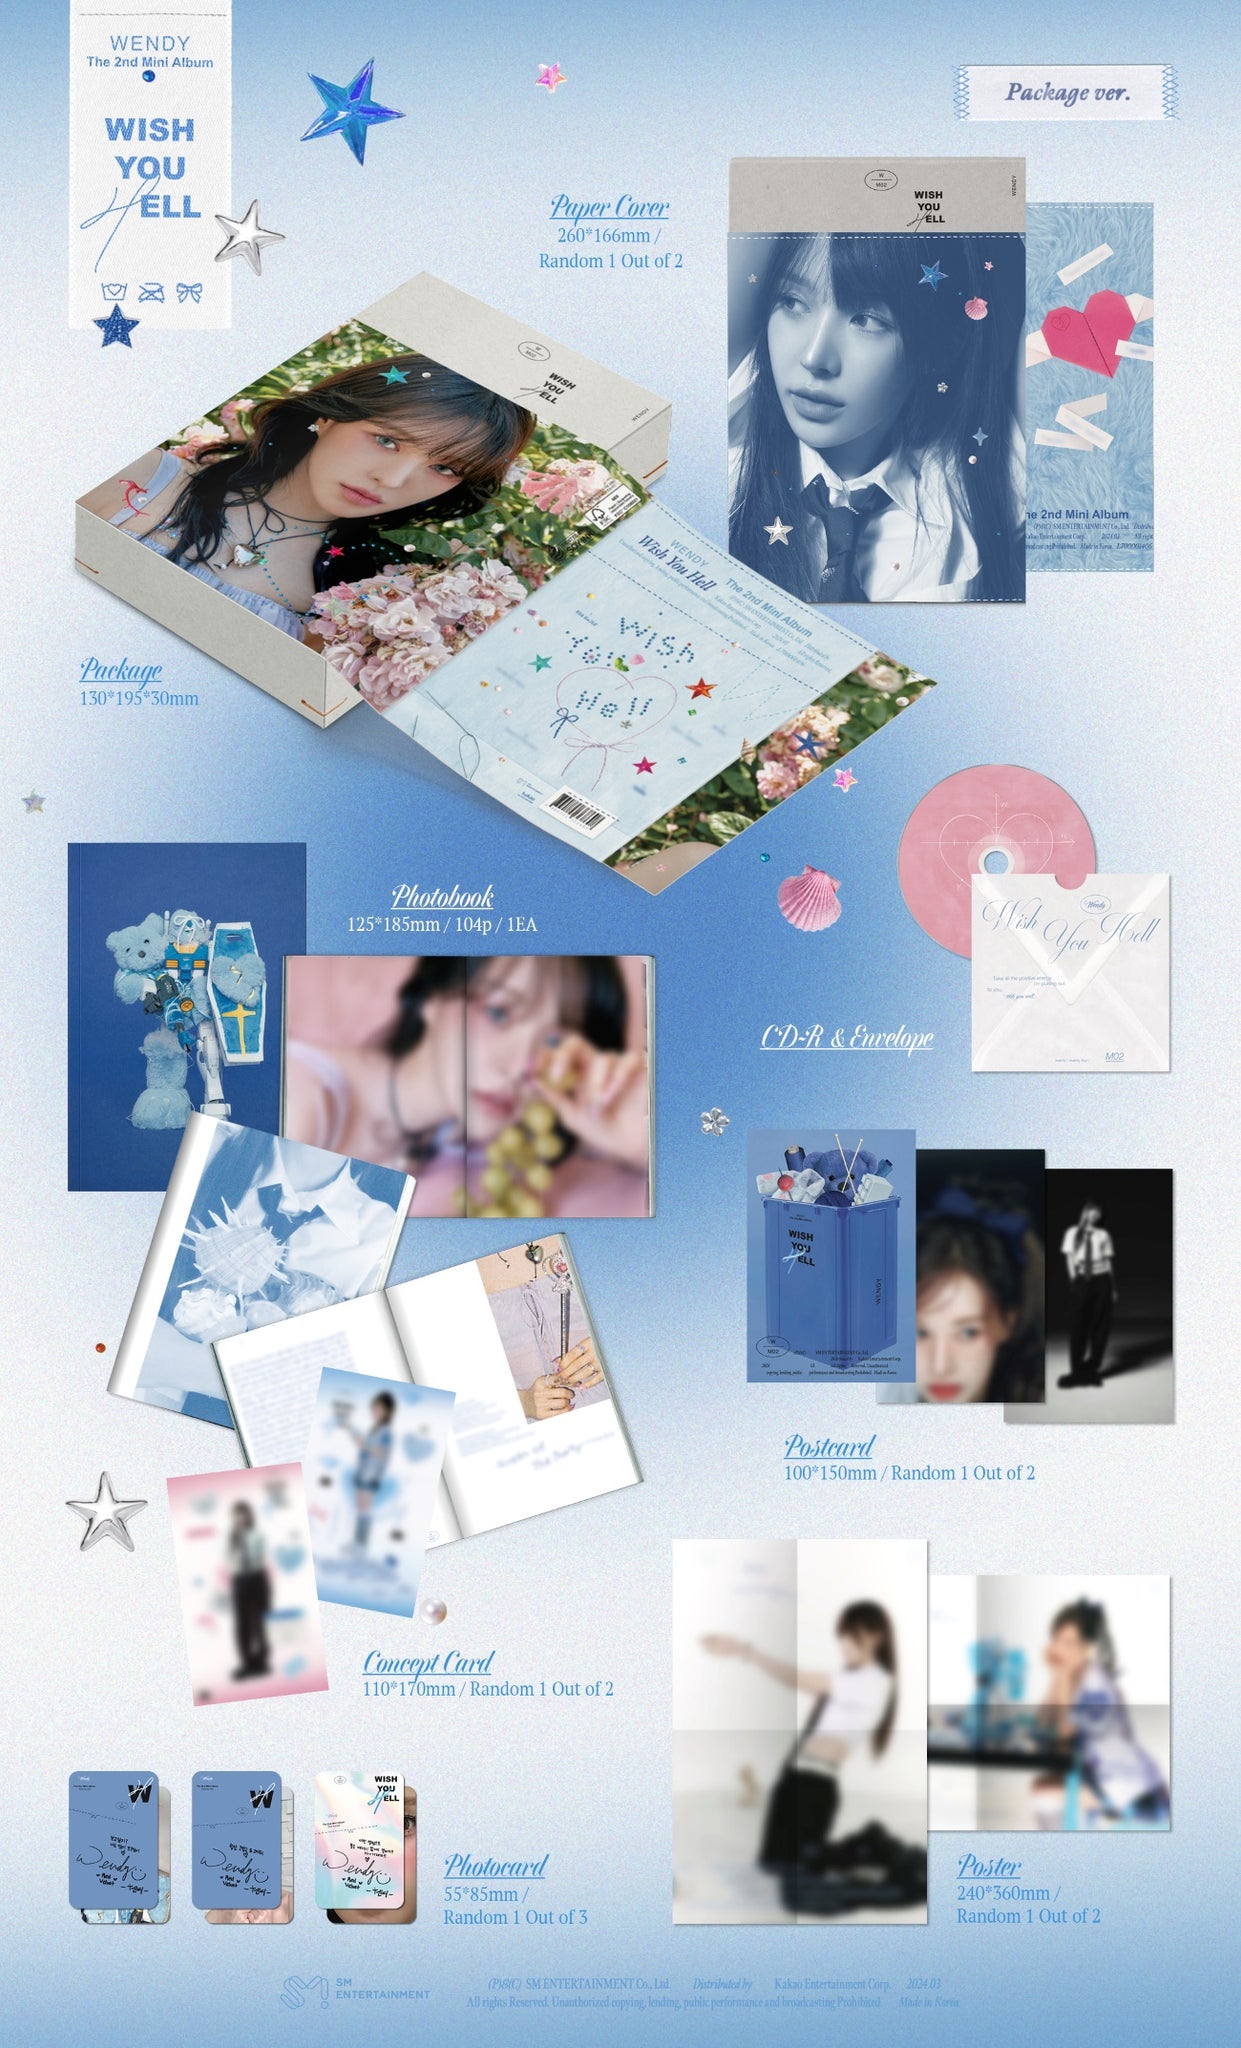 Wendy (Red Velvet) 2nd Mini Album Wish You Hell - Package Version Inclusions Paper Cover, Package, Photobook, CD & Envelope, Concept Card, Postcard, Photocard, Folded Poster